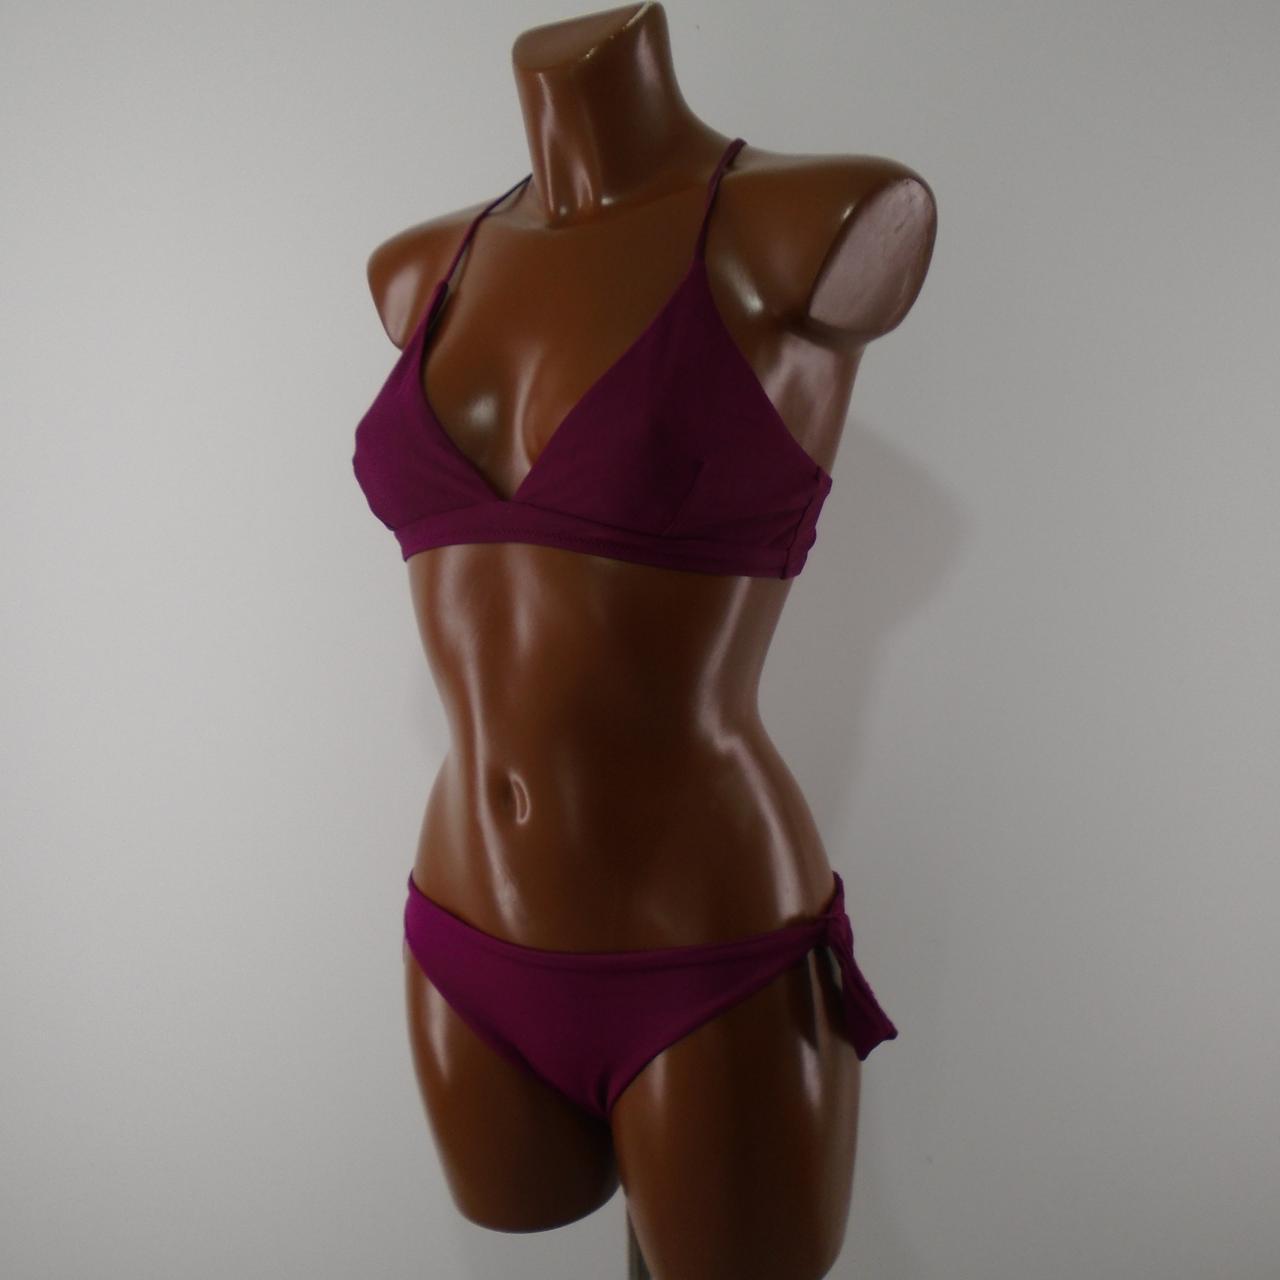 Women's Swimsuit Calzedonia. Violet. S. Used. Good